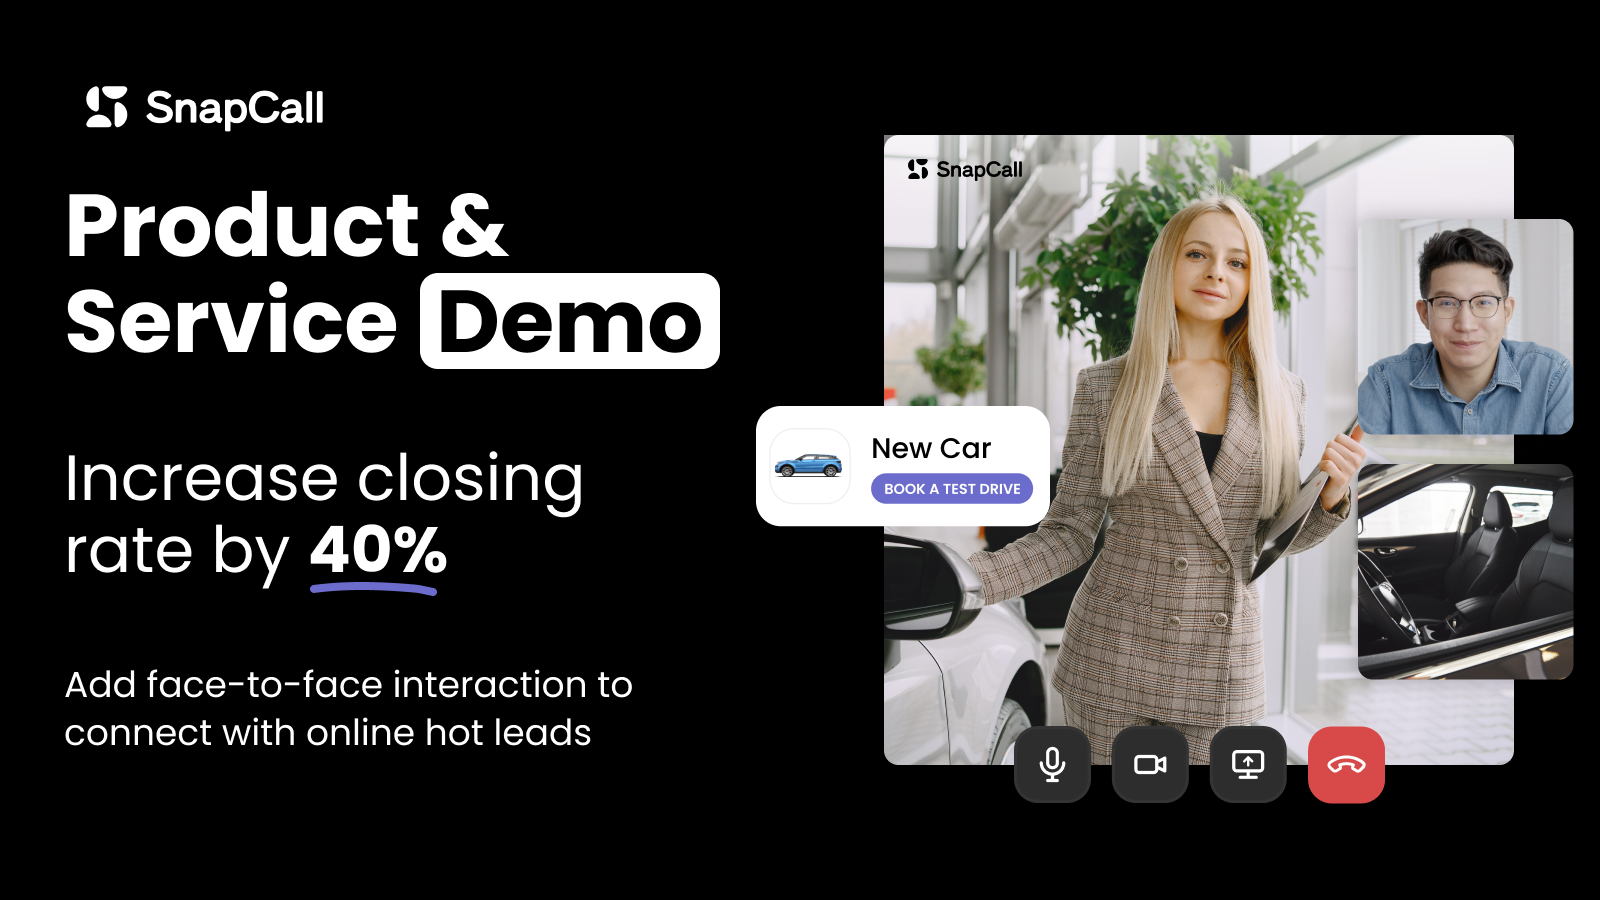 Product & Service DEMO: increase closing rate by 40%